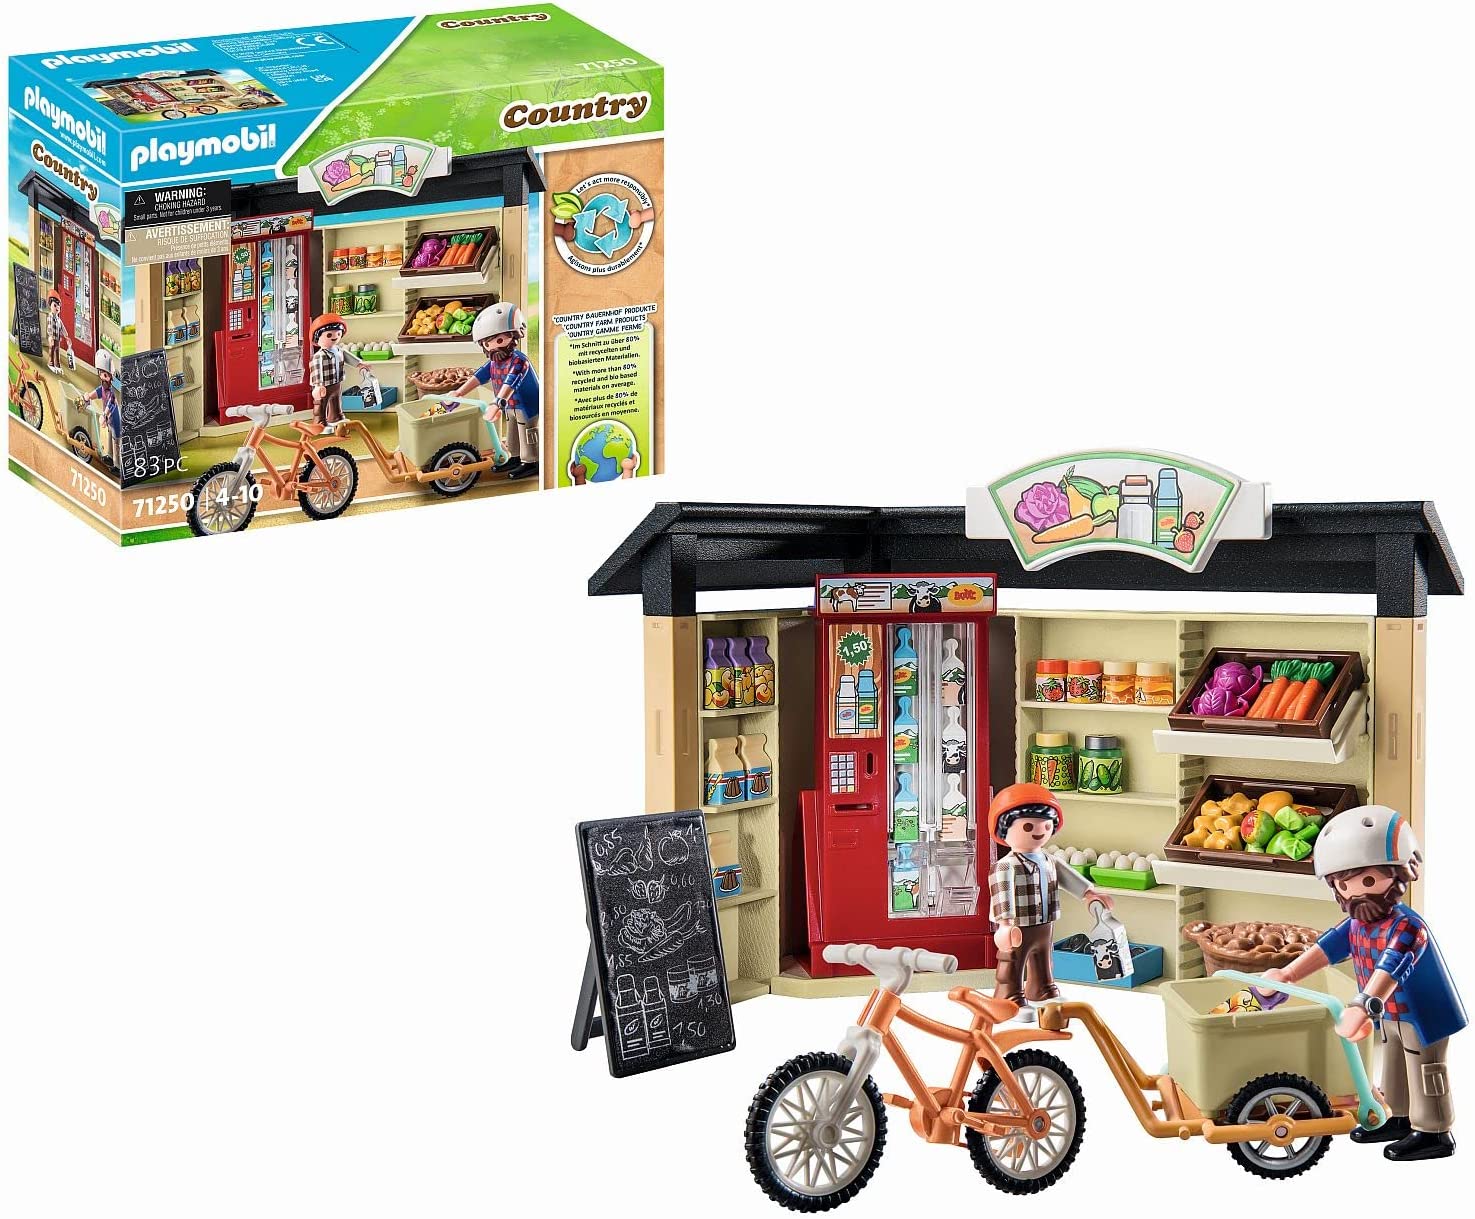 Playmobil Country 71250 24 Hour Farm Shop Bicycle With Trailer Food Shop for Organic Farm Sustainable Toy for Children from 4 Years